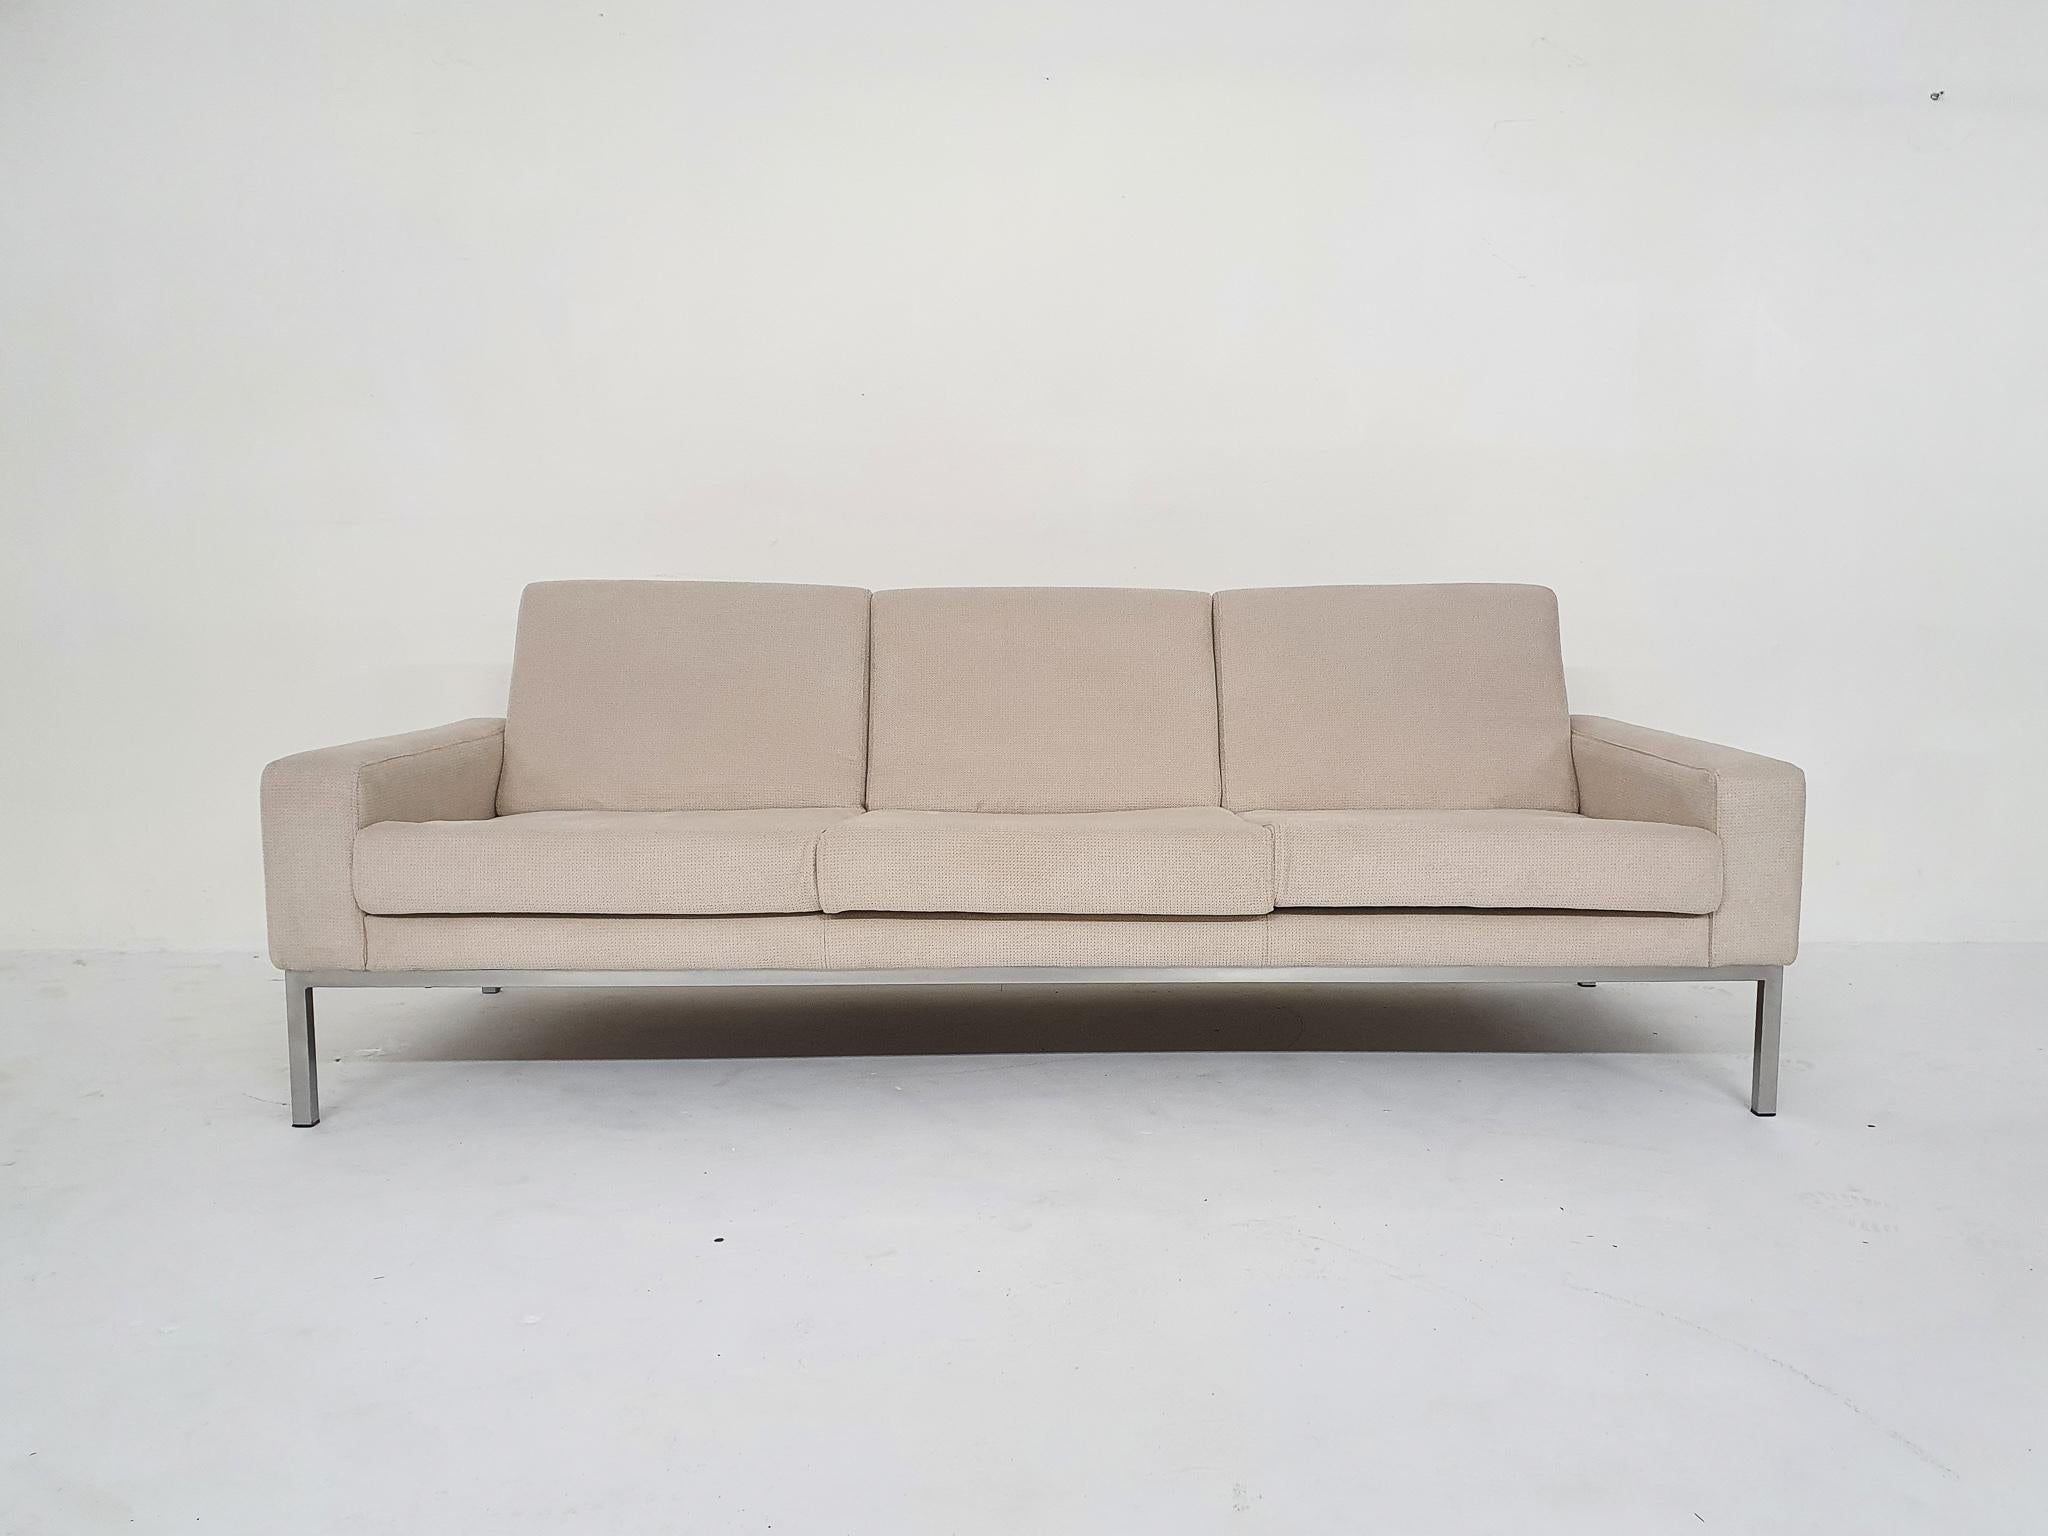 Mid-Century Modern three seater sofa on a metal frame, with new off white upholstery, and new filling.
We think the sofa was manufactured by Gelderland in the 1950's.